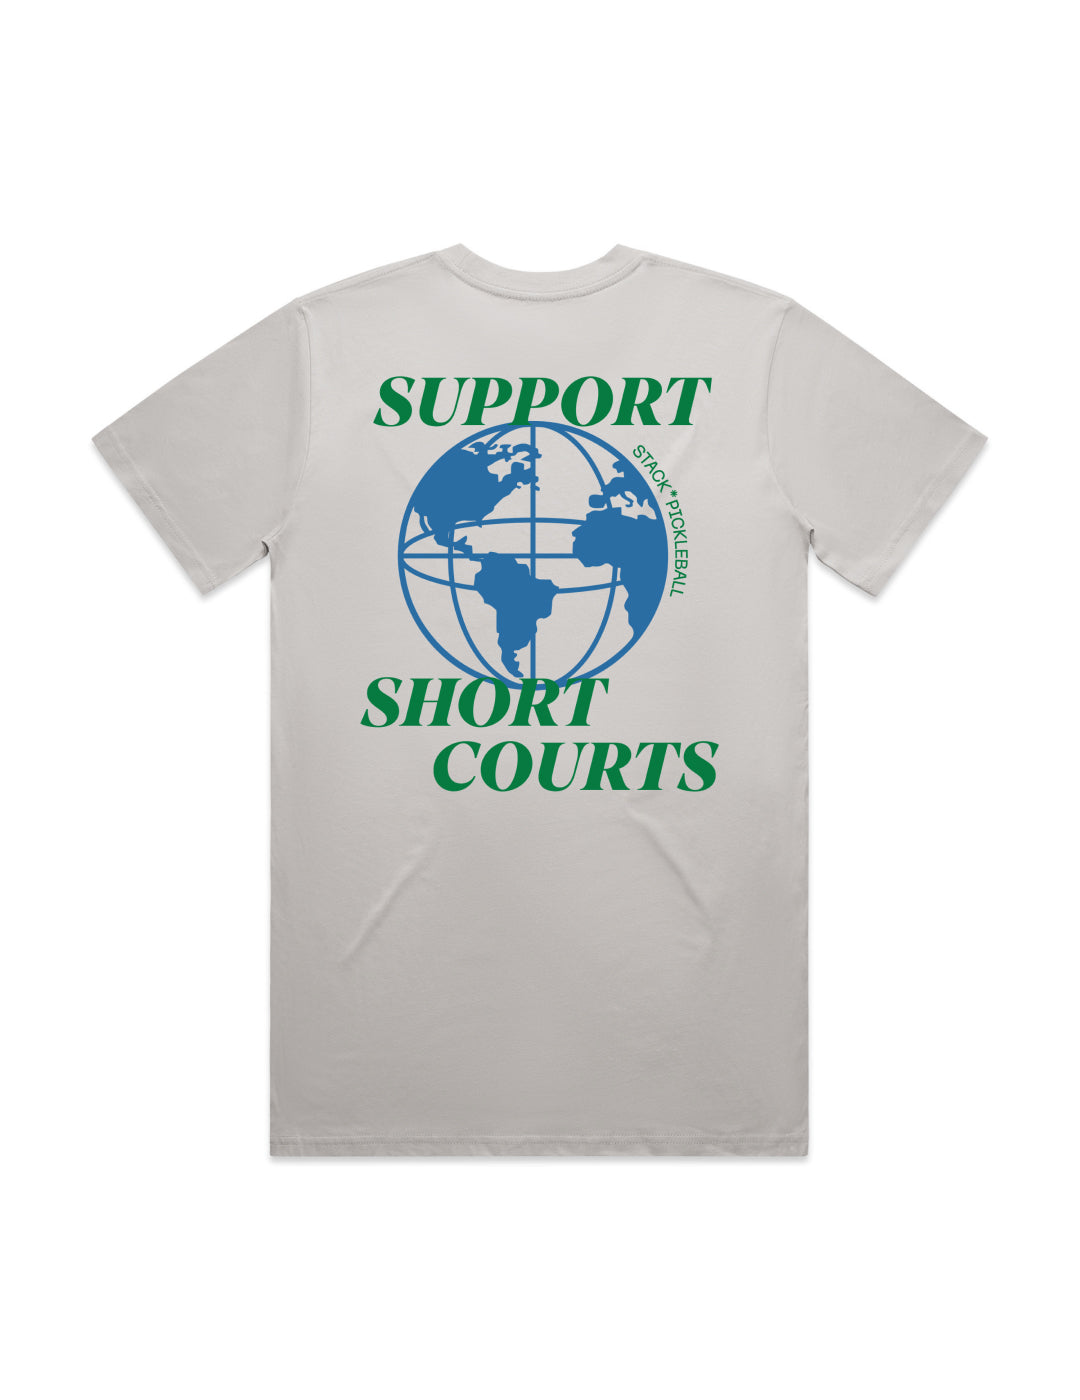 Support Short Courts Tee